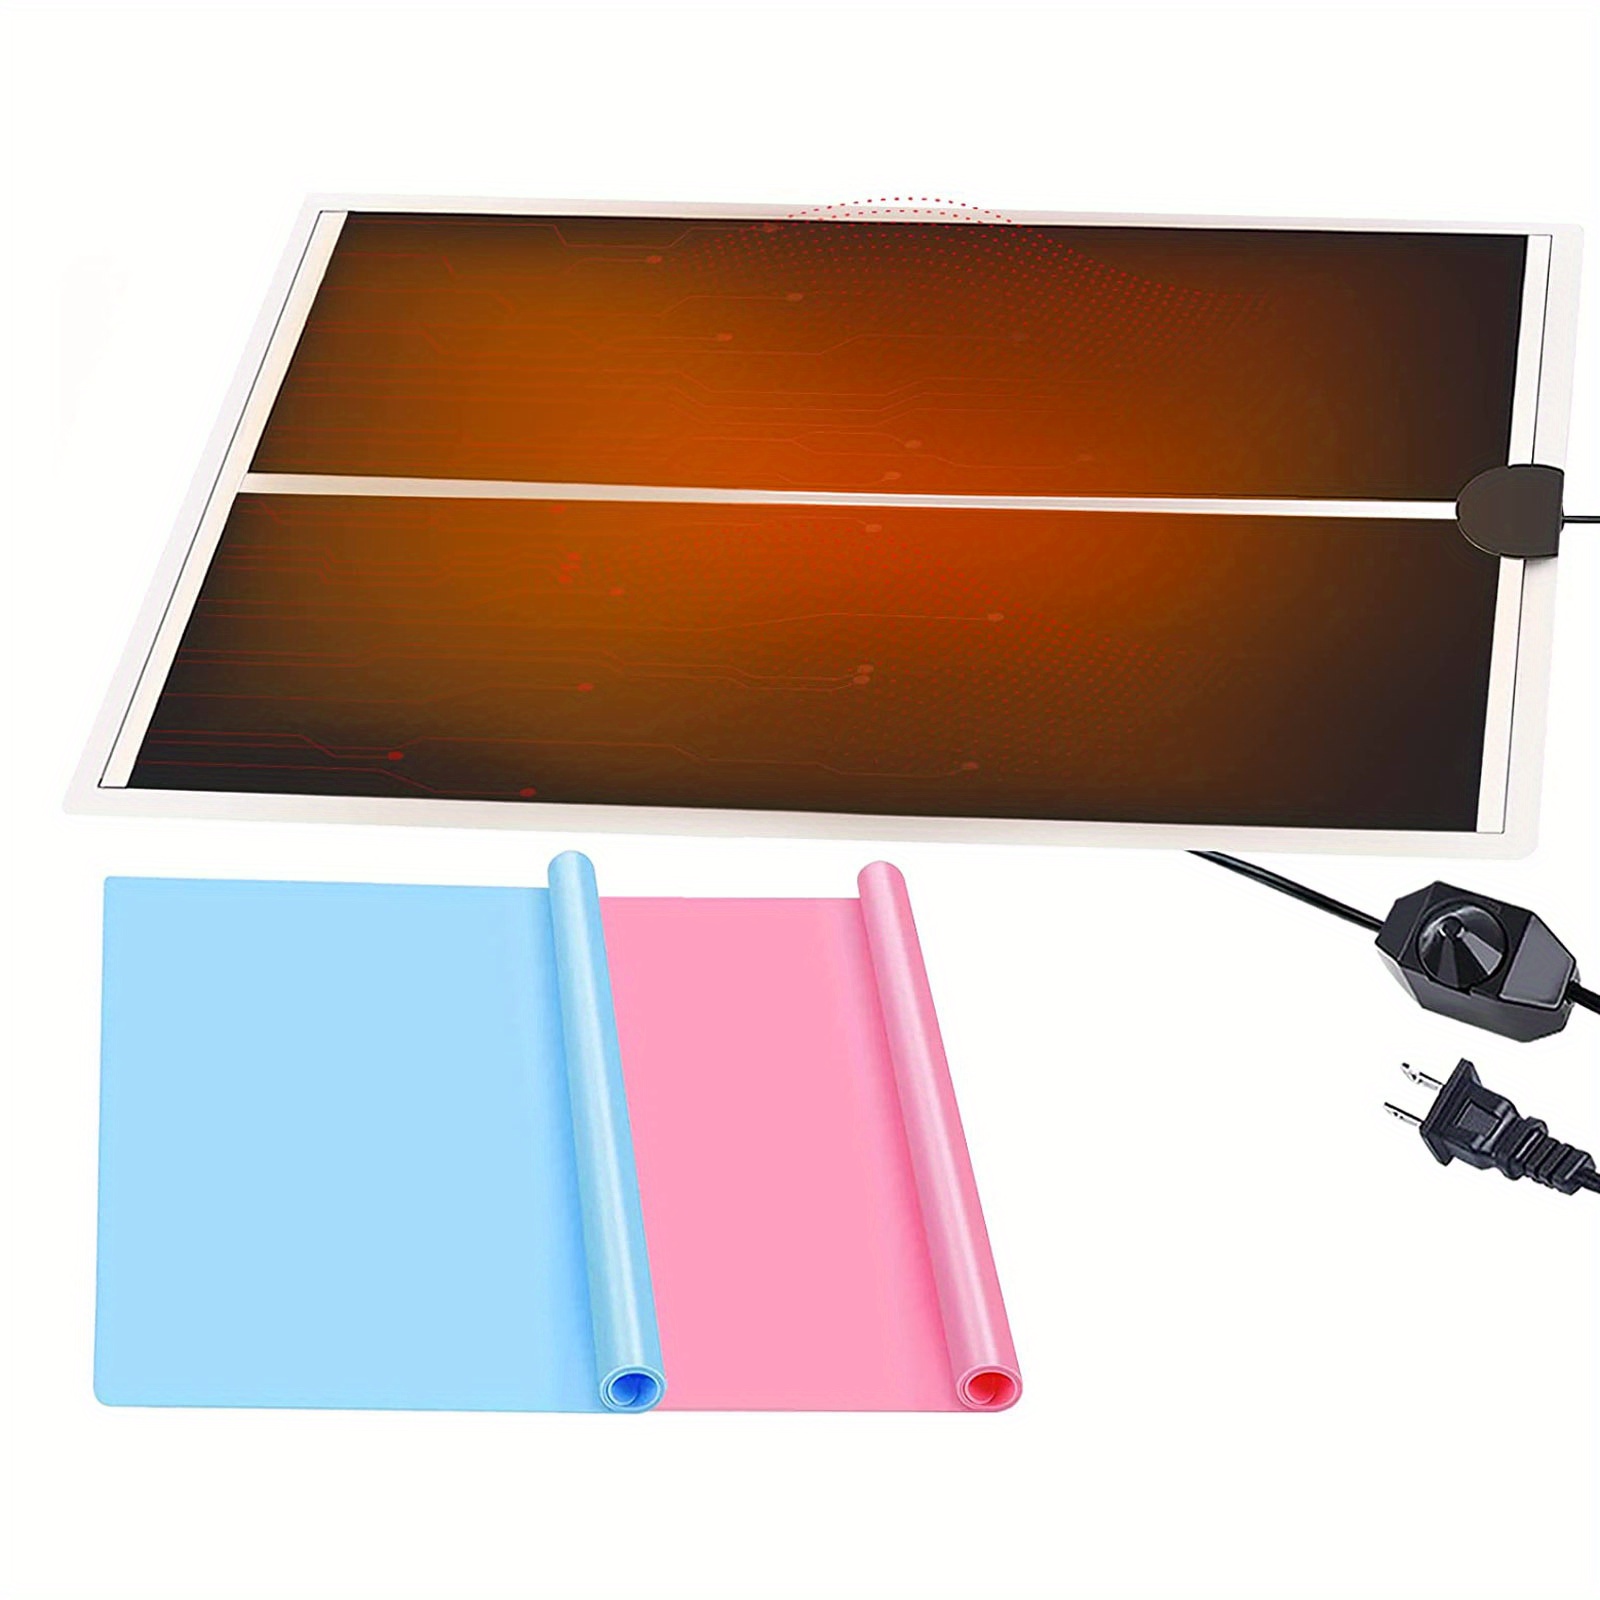  Resin Curing Mat,45W Resin Heating Mat with Timing and